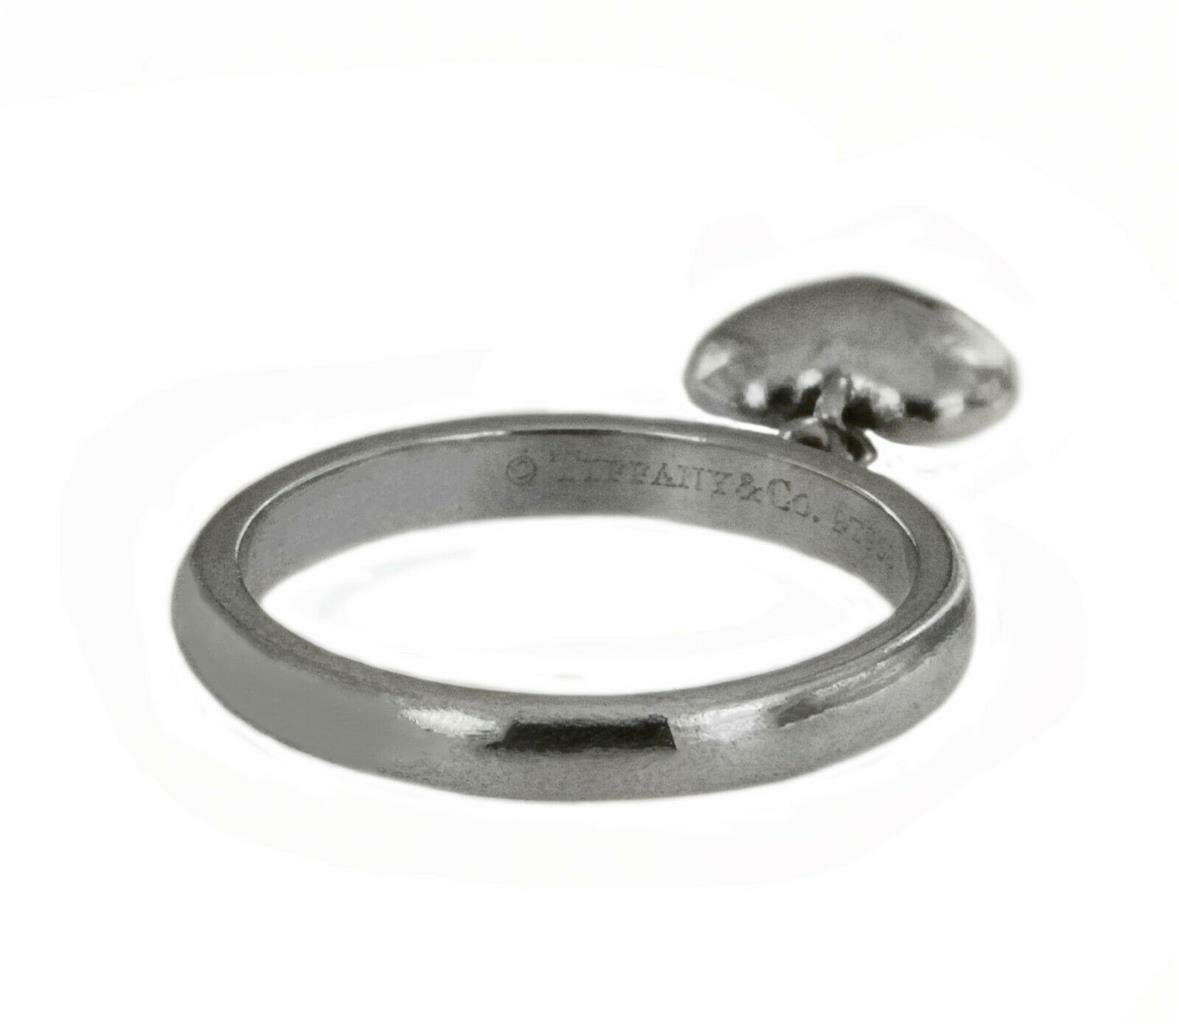 Good condition - Platinum - Band width: 2.7mm
- Ring size: 7
- Diamond: 0.17ct
- Comes with Tiffany box